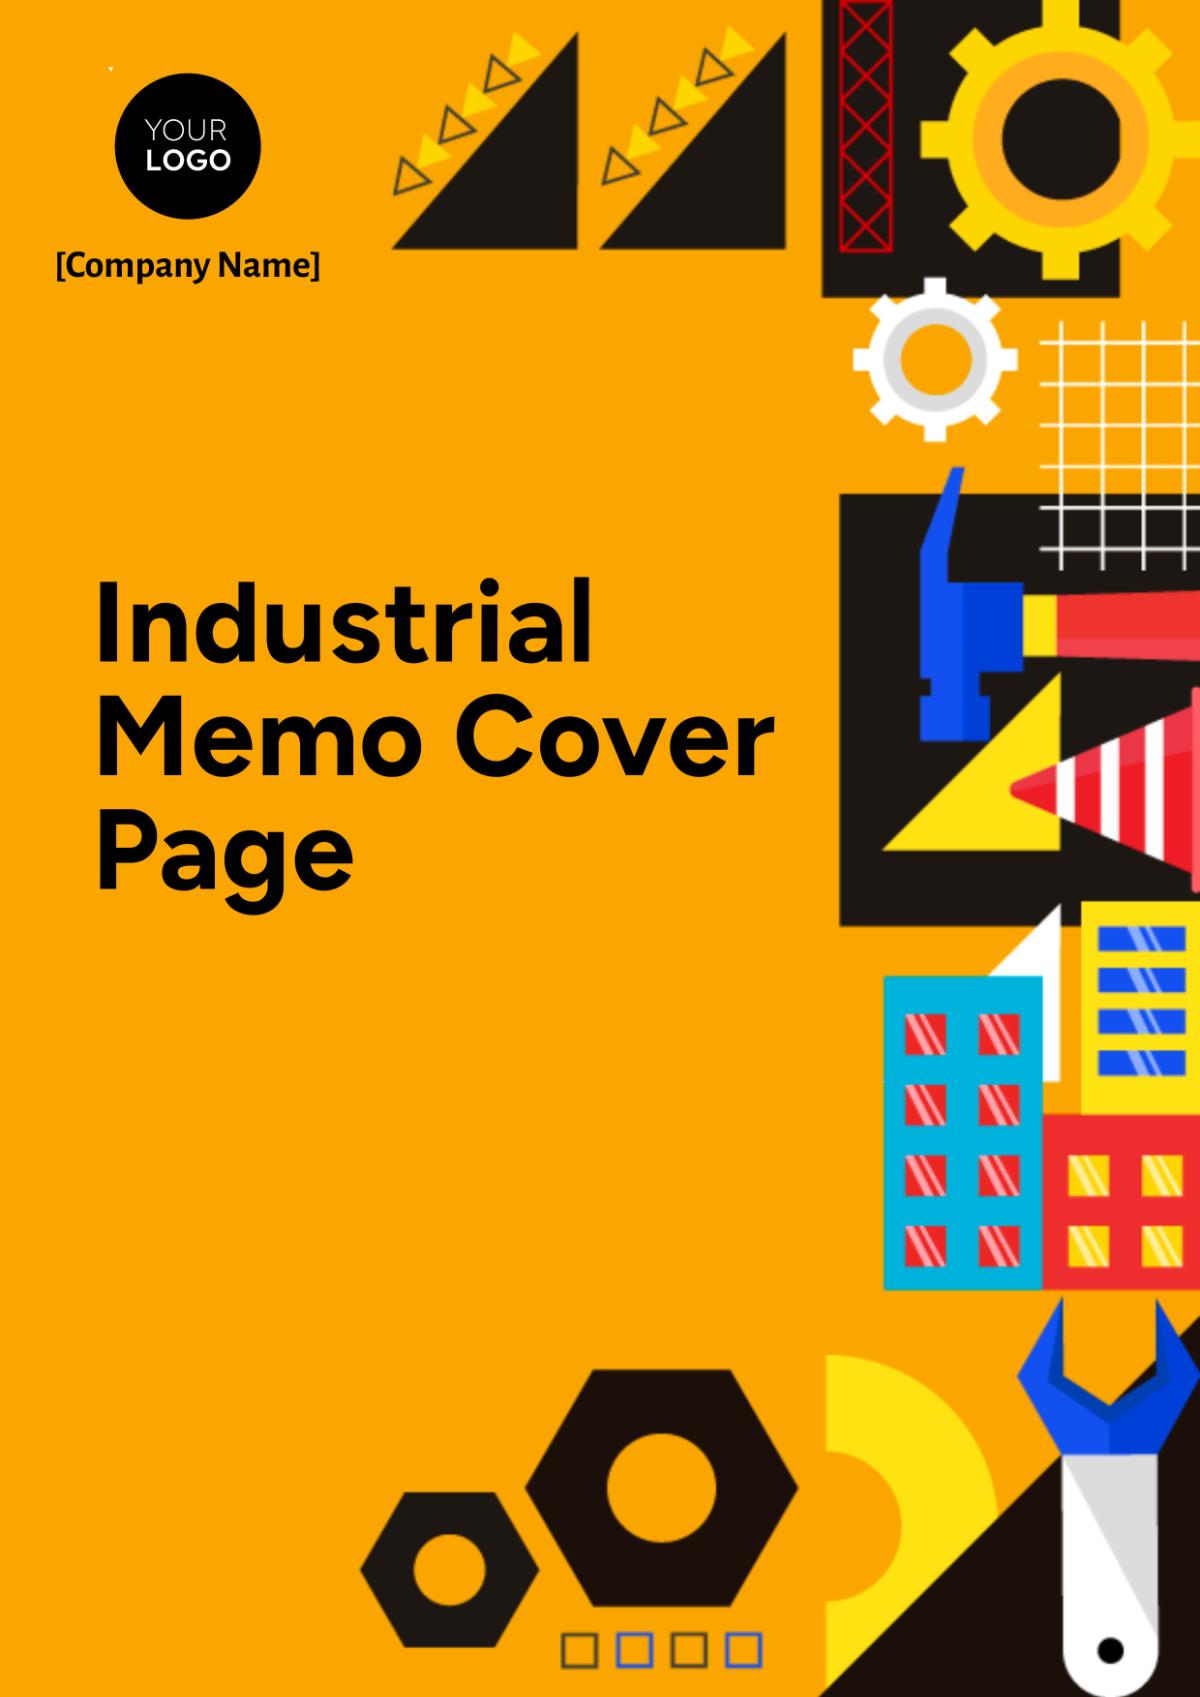 Industrial Memo Cover Page Template